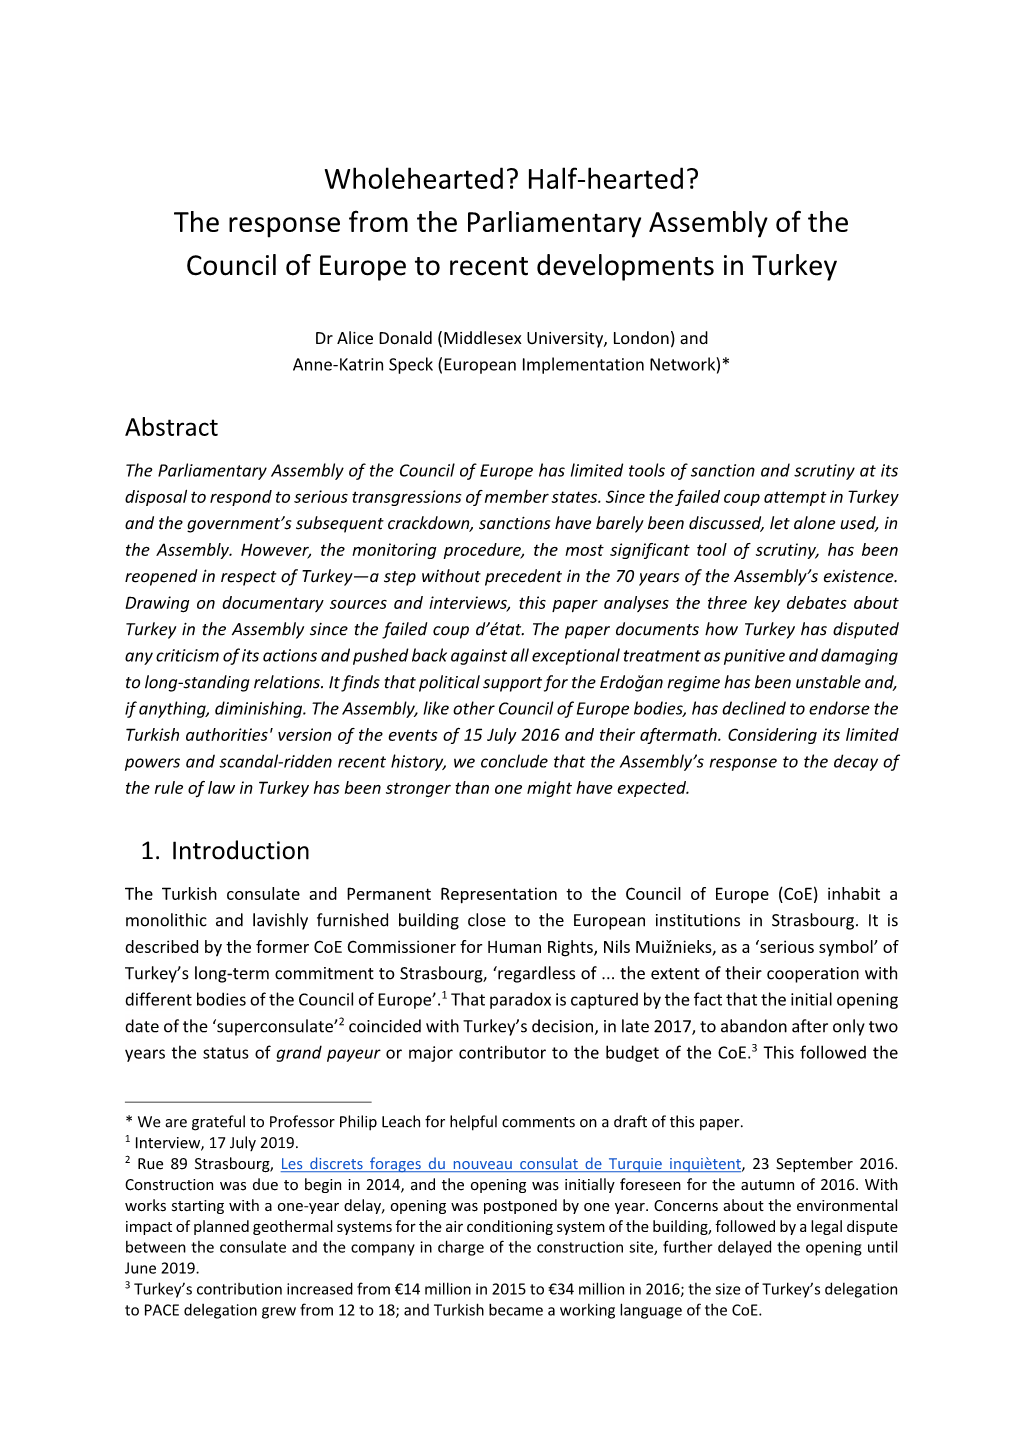 Wholehearted? Half-Hearted? the Response from the Parliamentary Assembly of the Council of Europe to Recent Developments in Turkey